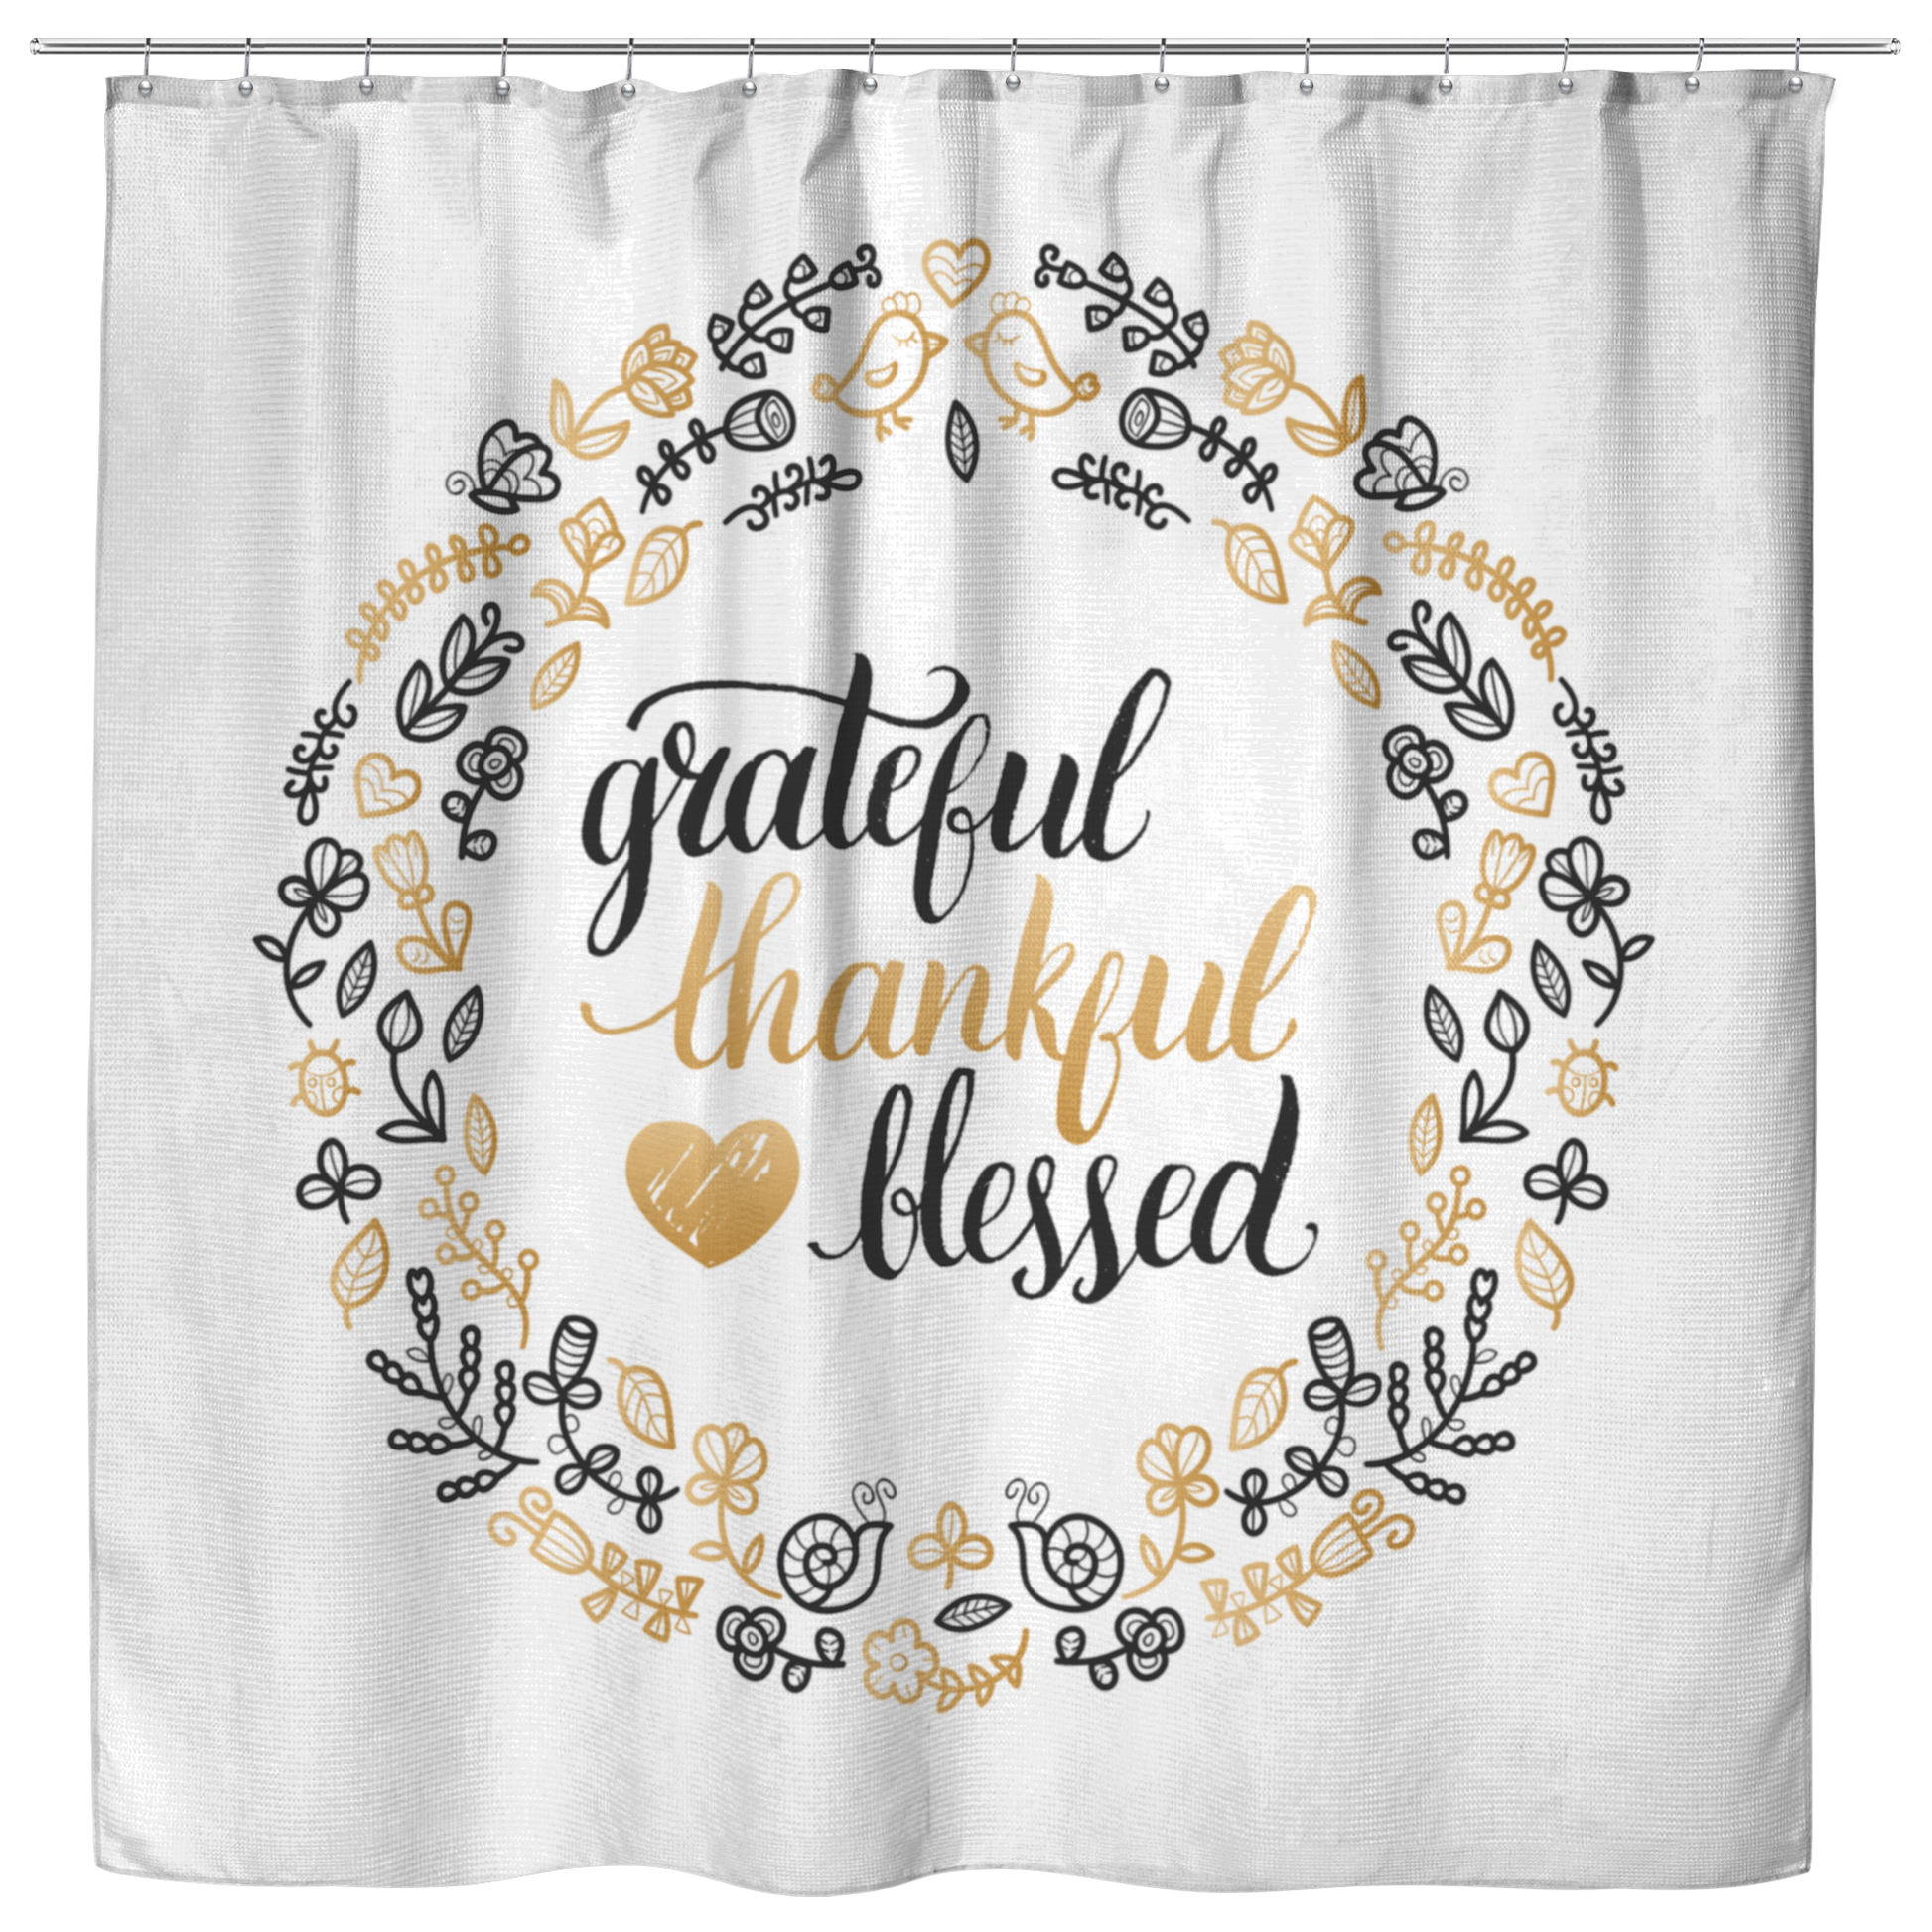 Grateful - Thankful - Blessed - Shower Curtain